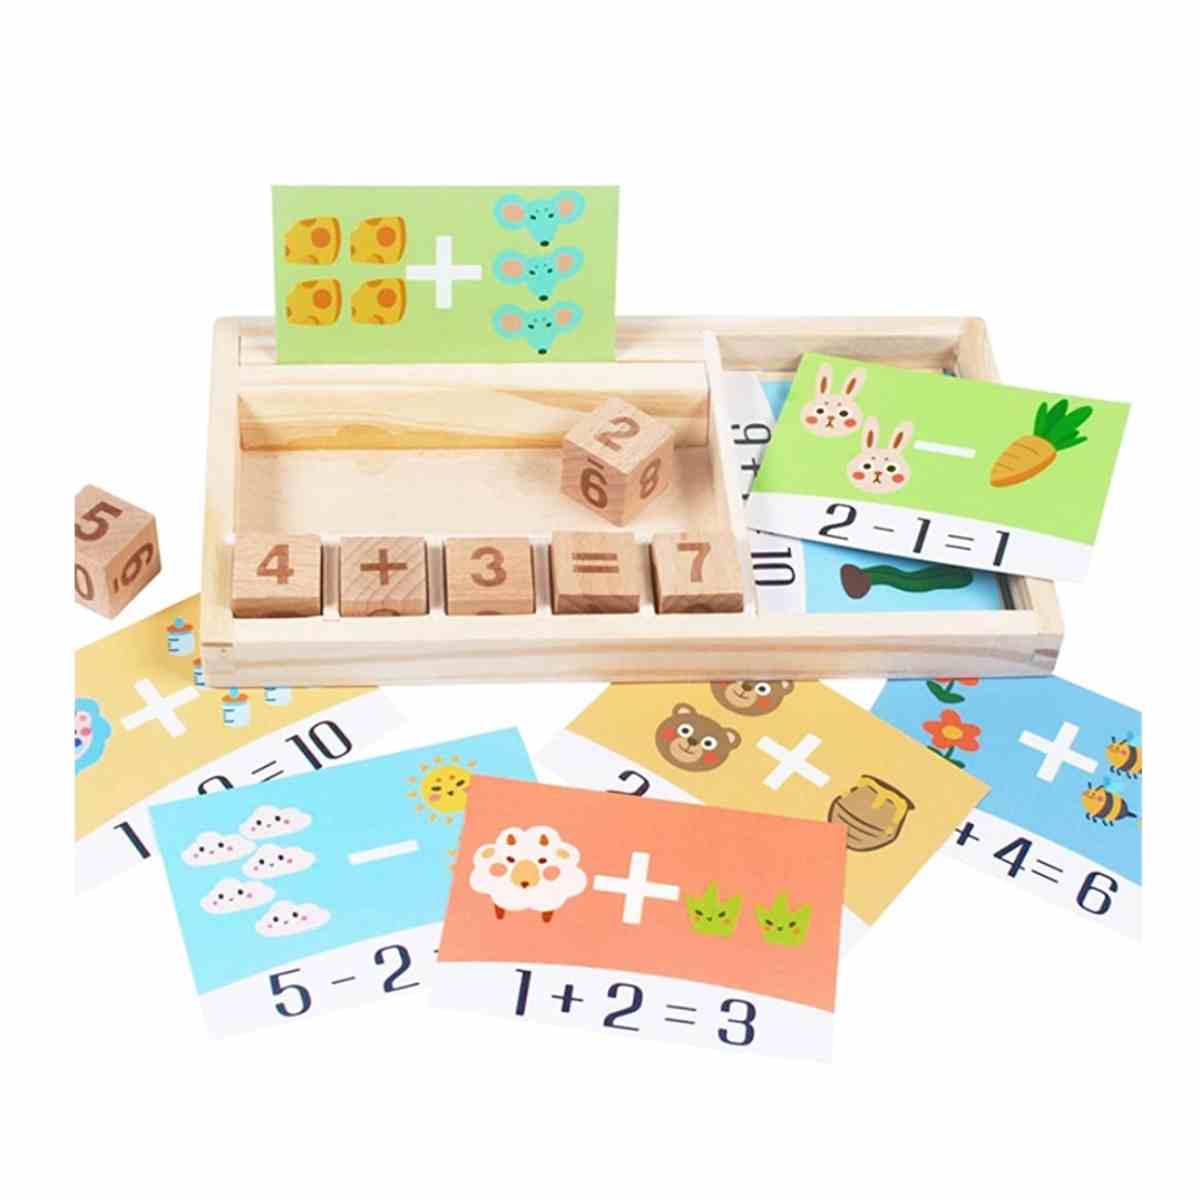 Kids Math counting game